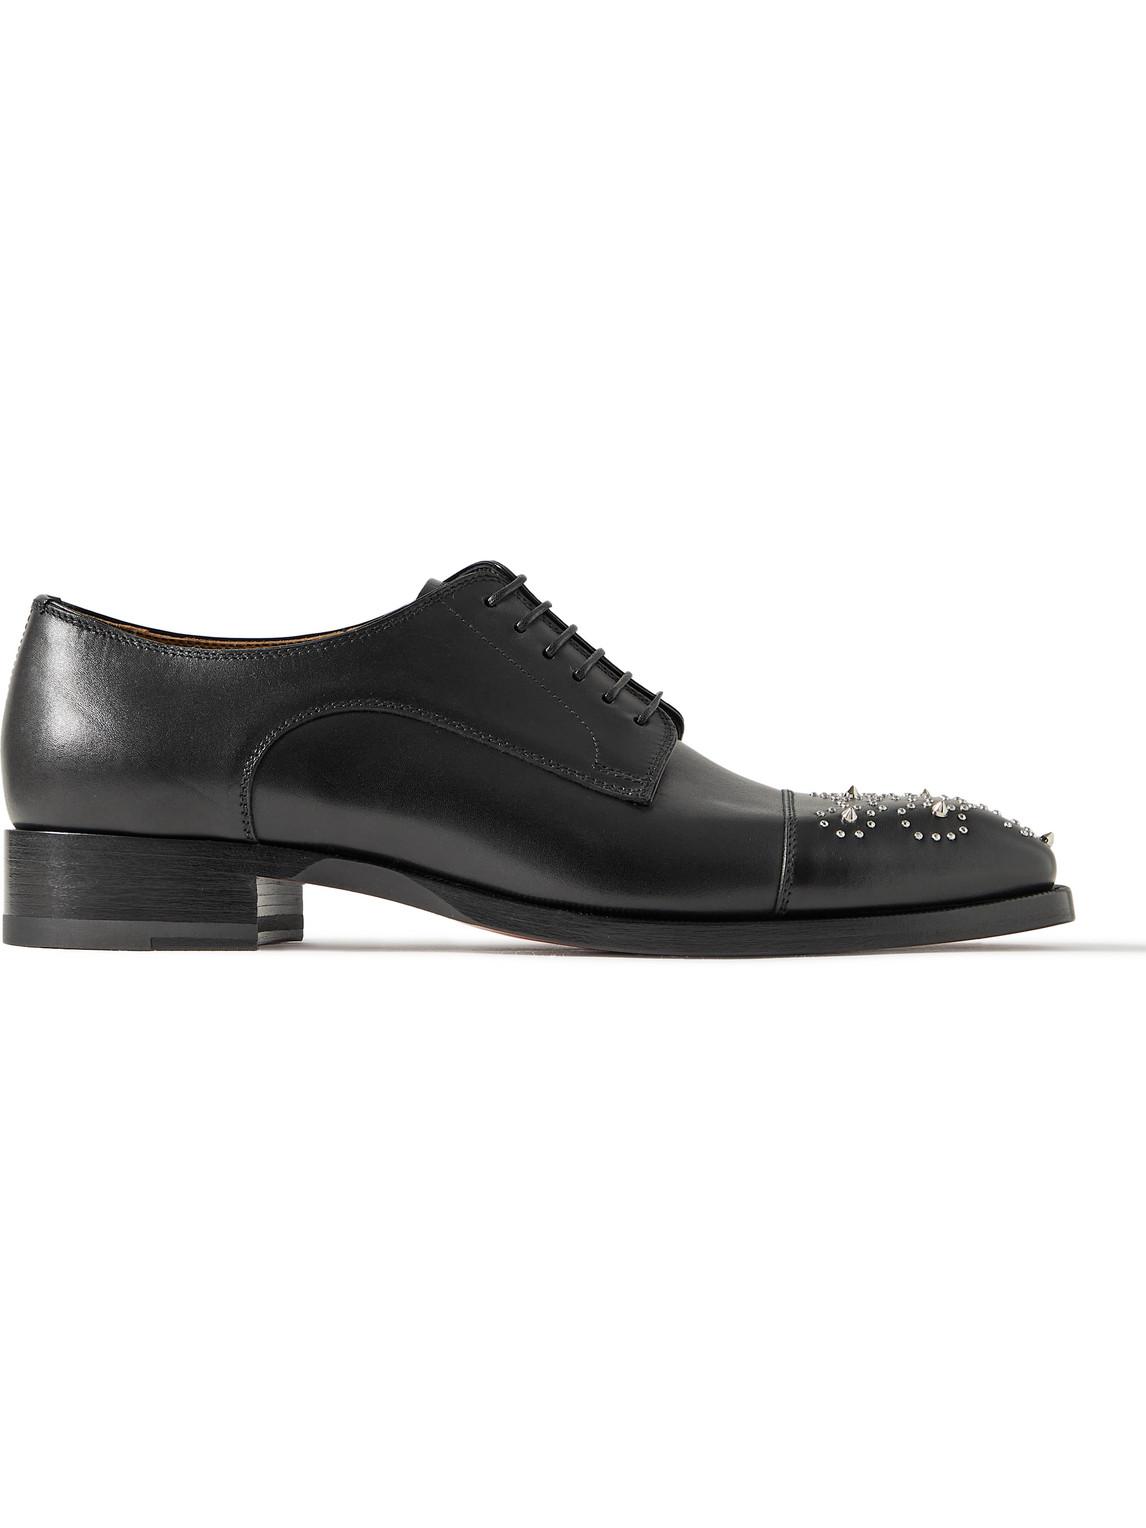 Christian Louboutin Maltese Studded Leather Derby Shoes in Black for